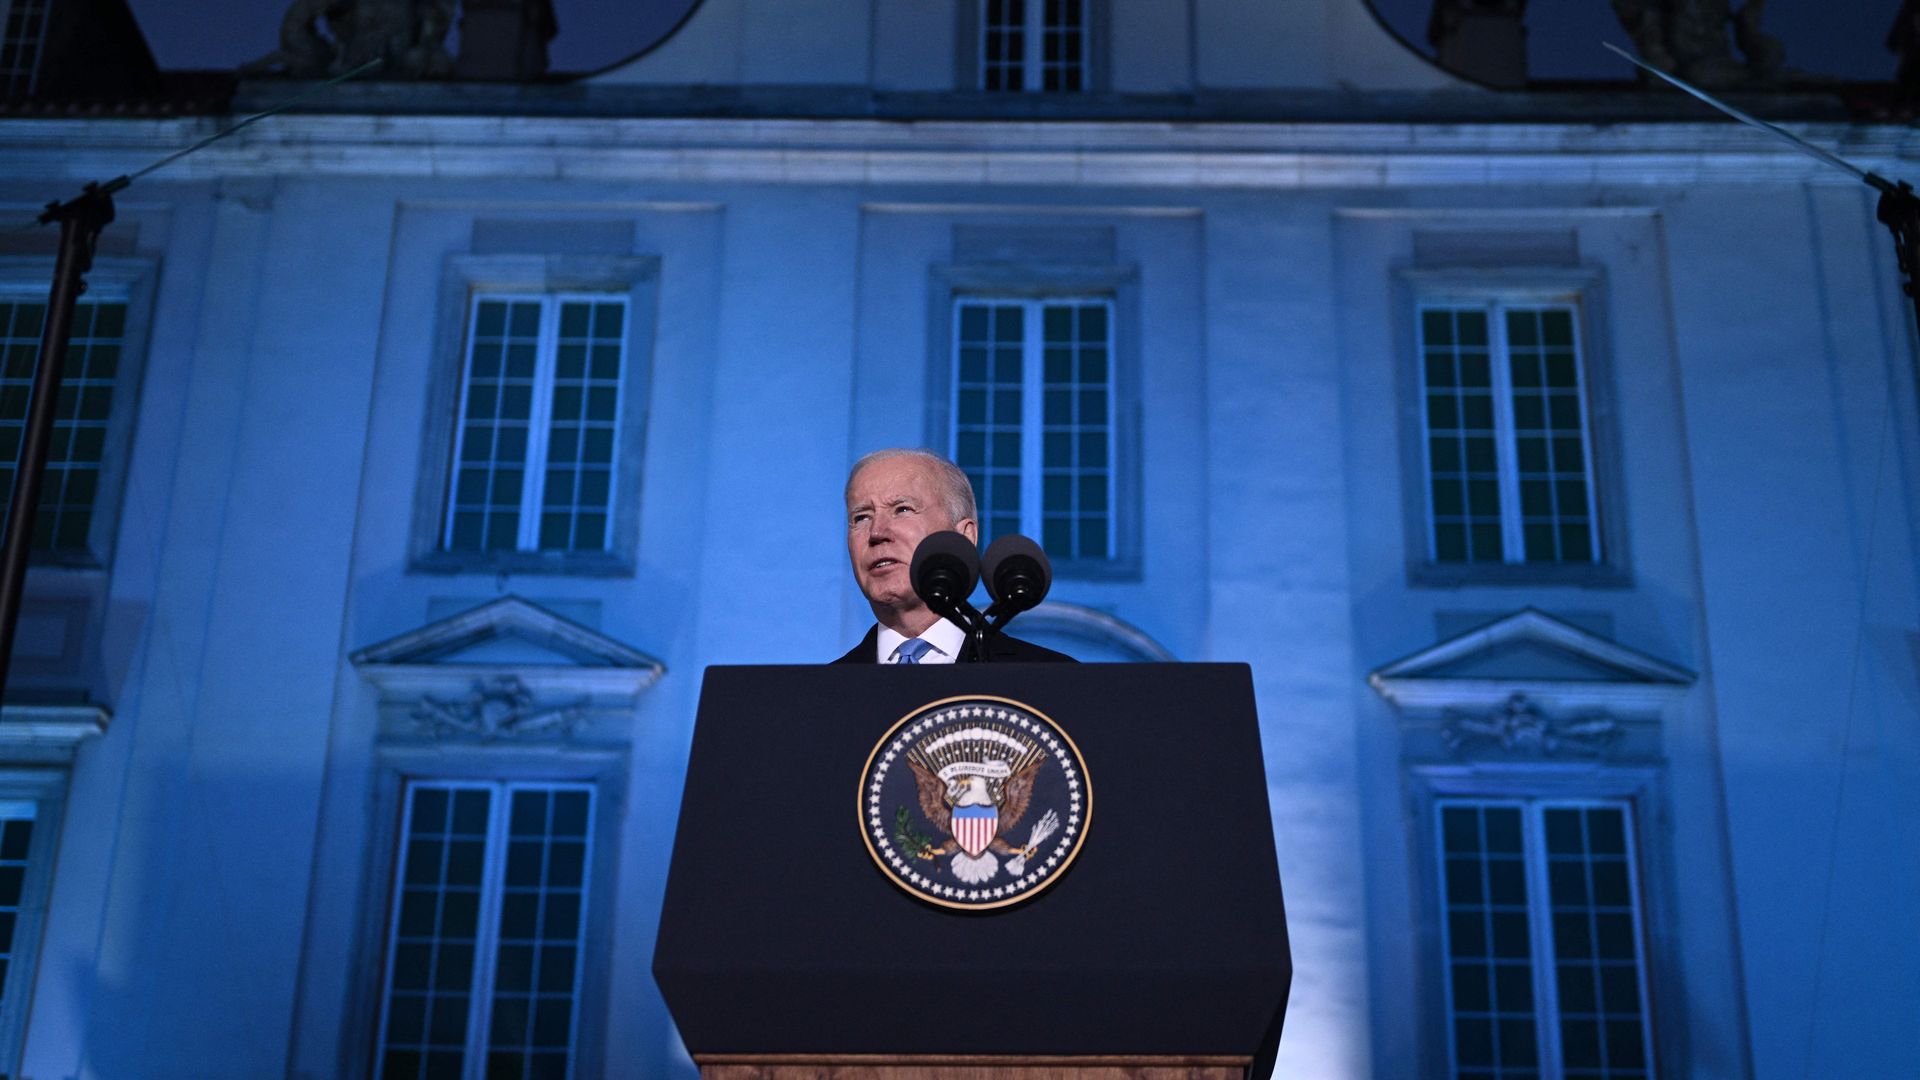 President Joe Biden delivers a speech at the Royal Castle in Warsaw, Poland on March 26, 2022.